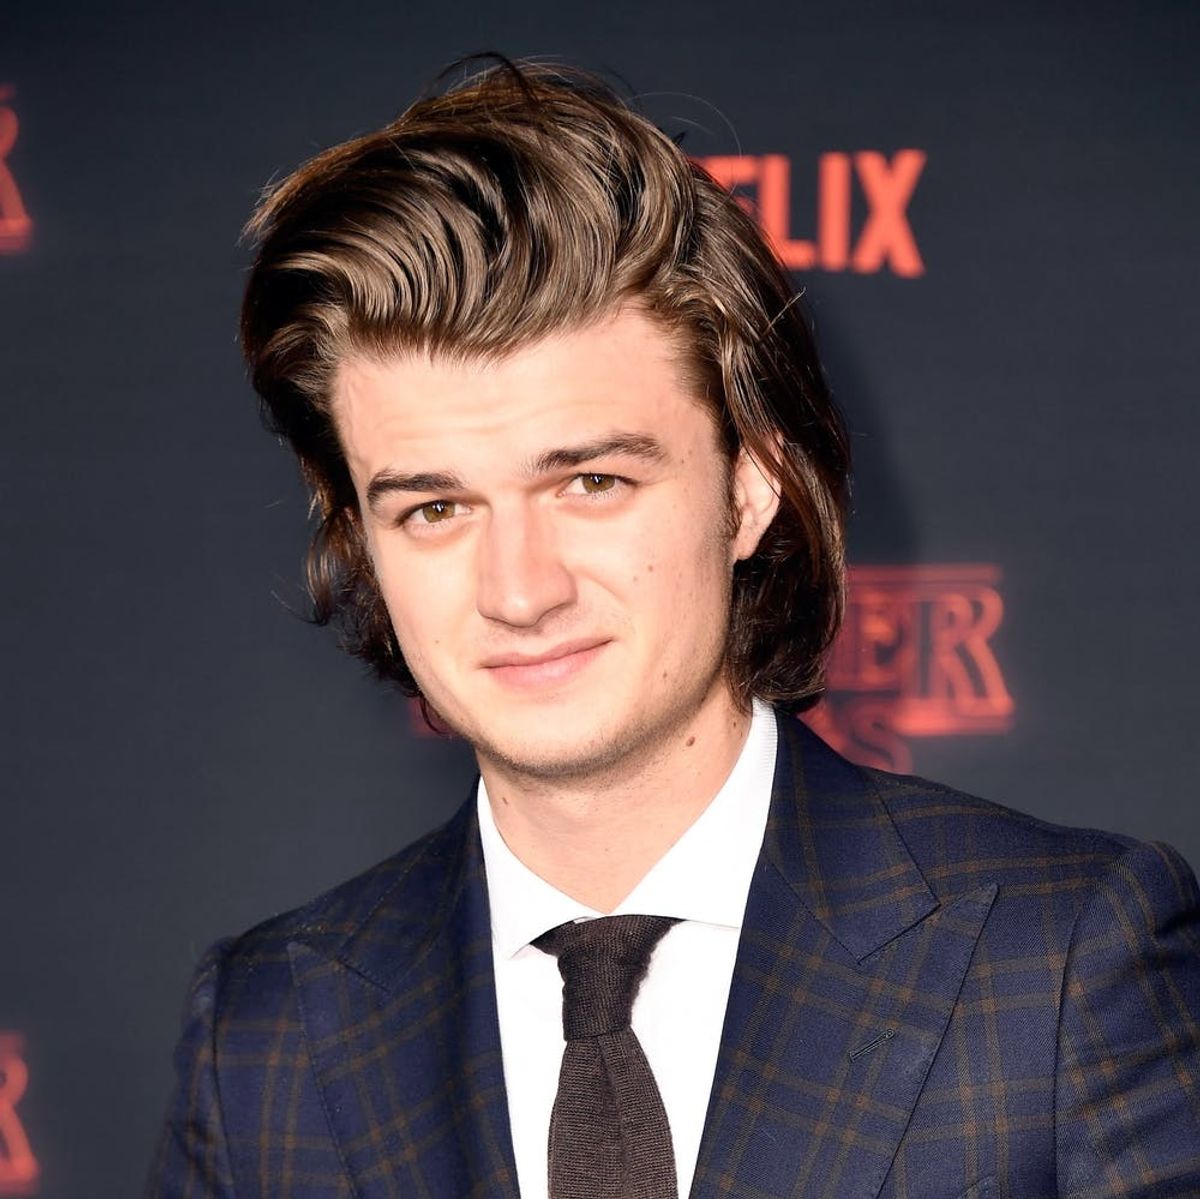 “Stranger Things” Star Joe Keery Has Revealed the Jaw-Dropping Plot Twist That Got Written Out of the Original Script